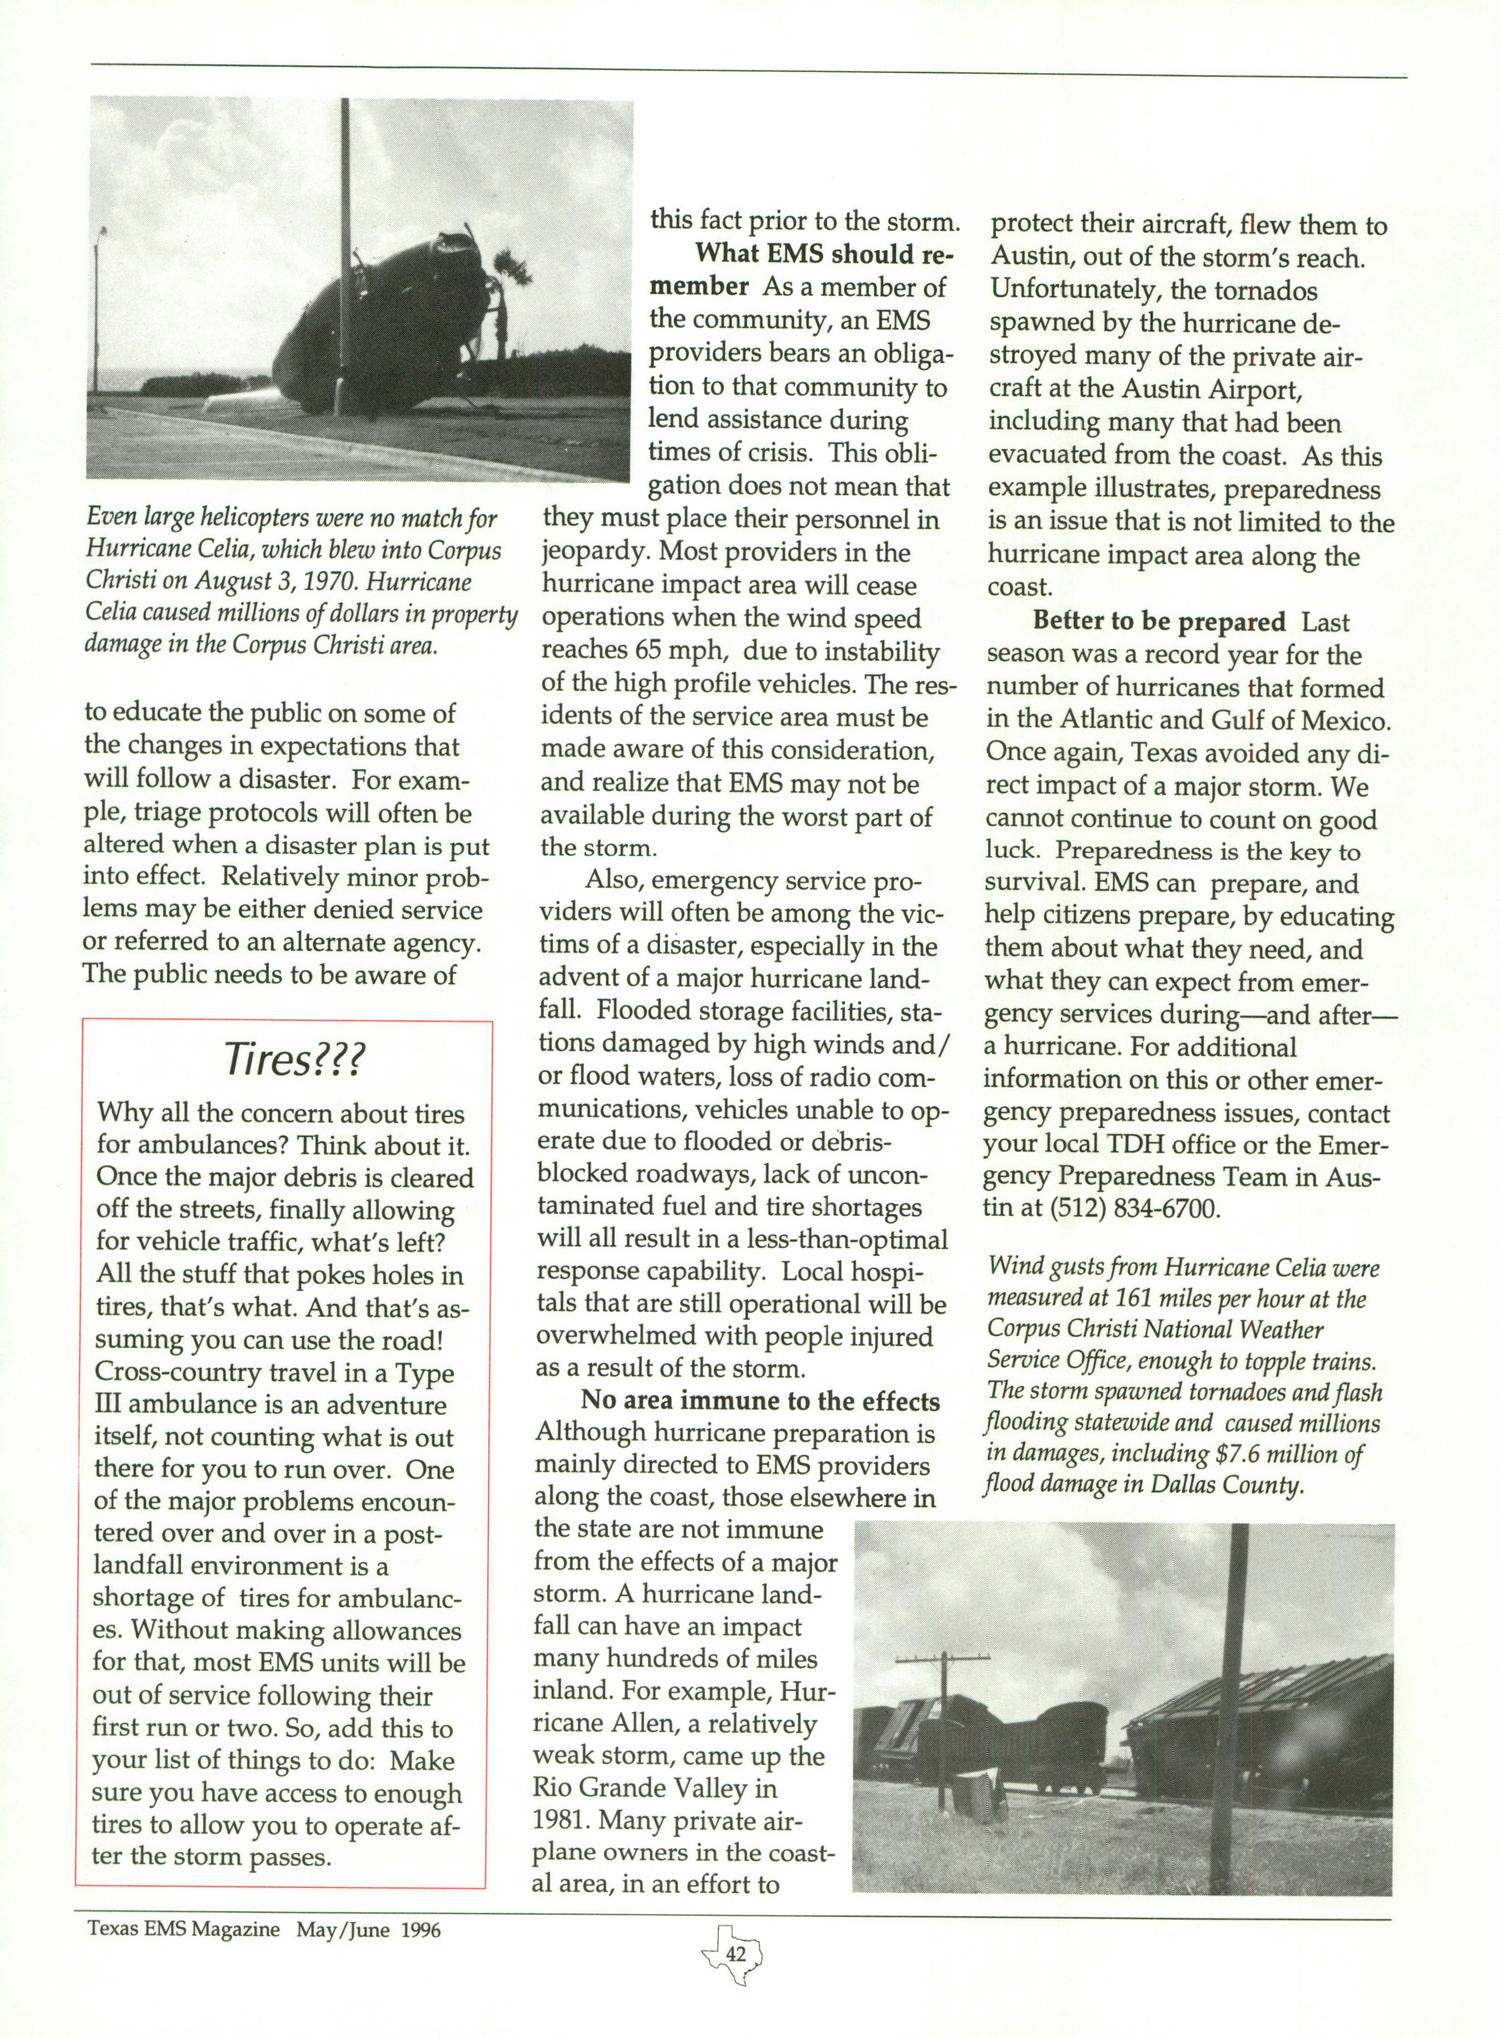 Texas EMS Magazine, Volume 17, Number 3, May/June 1996
                                                
                                                    42
                                                